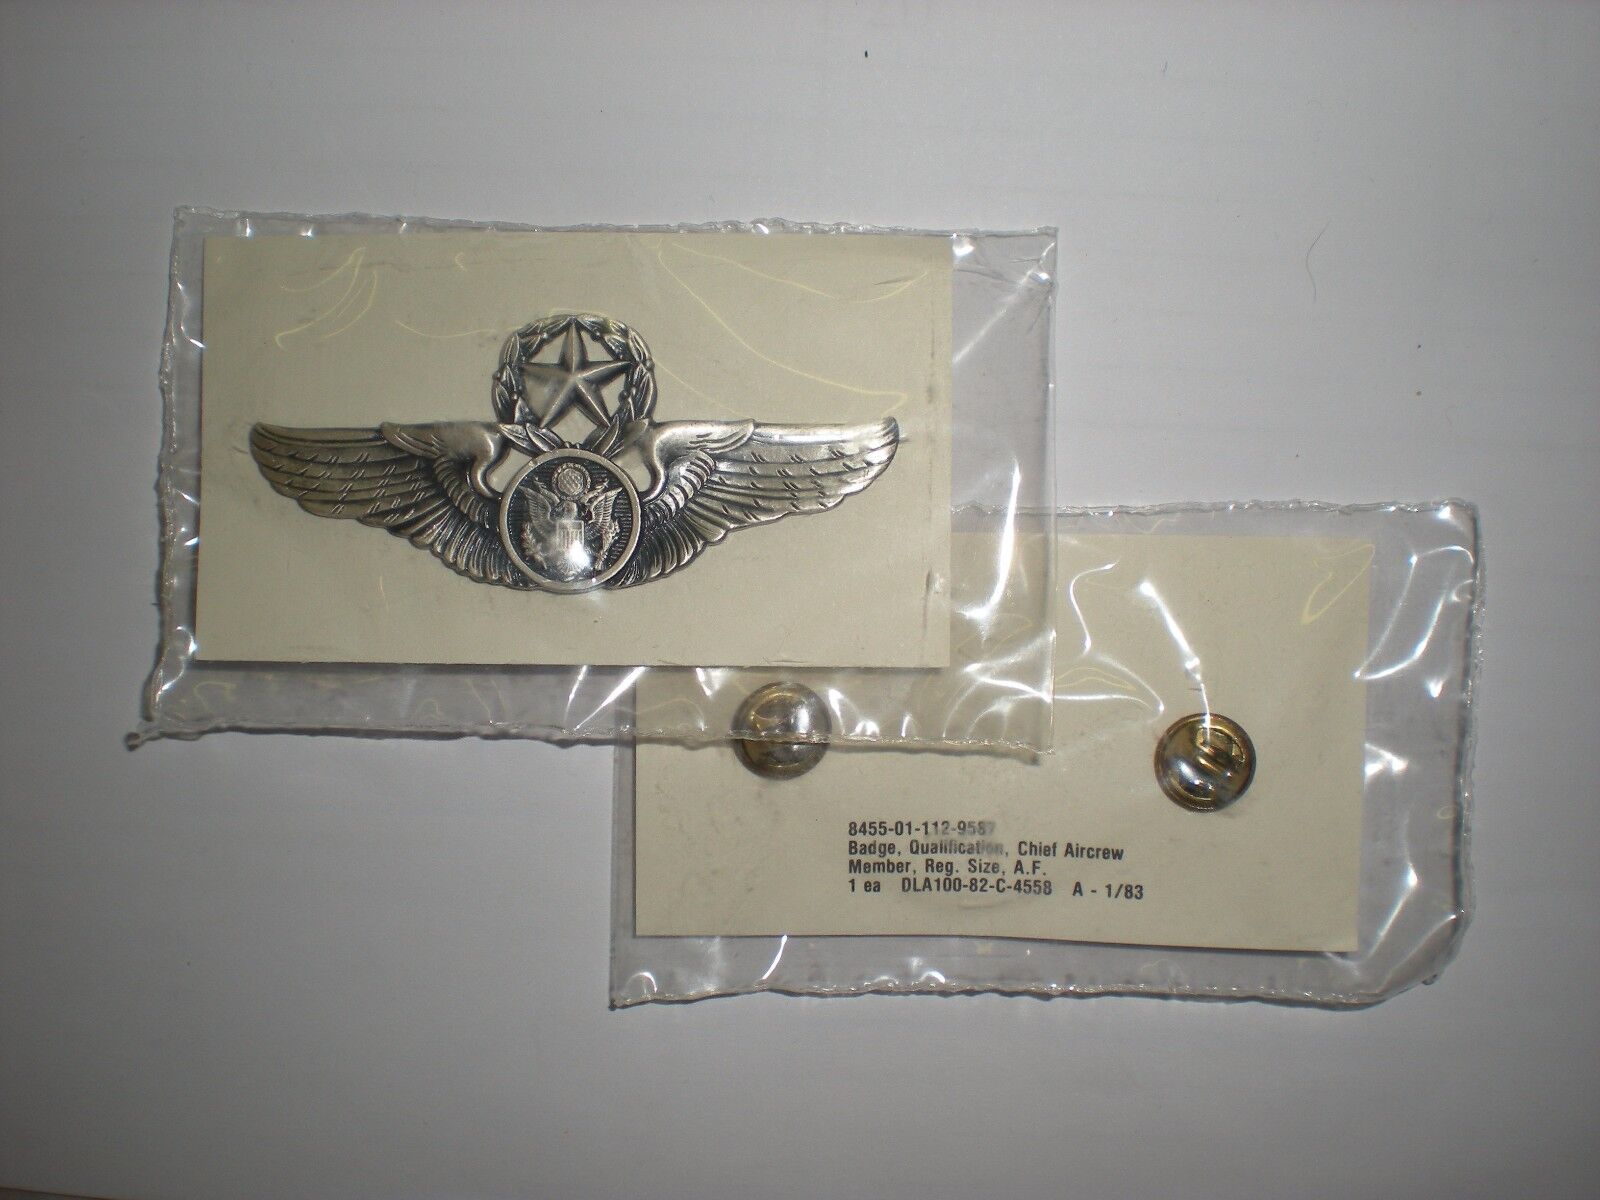 USAF CHIEF AIRCREW WINGS BADGE - FULL SIZE - SILVER OXIDIZED - MINT ON CARD